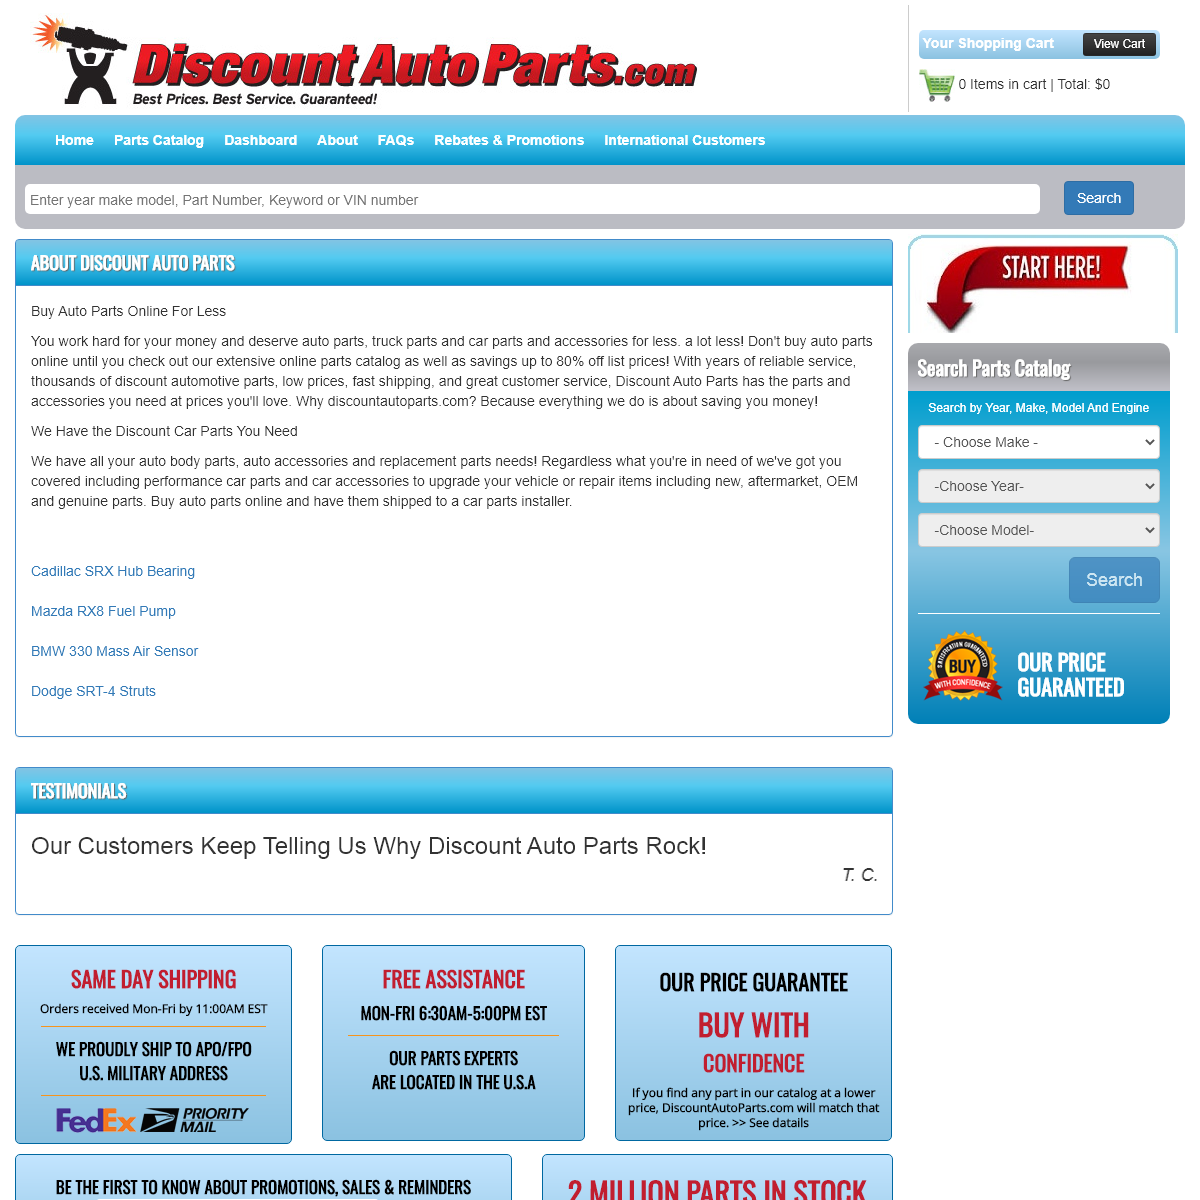 A complete backup of discountautoparts.com